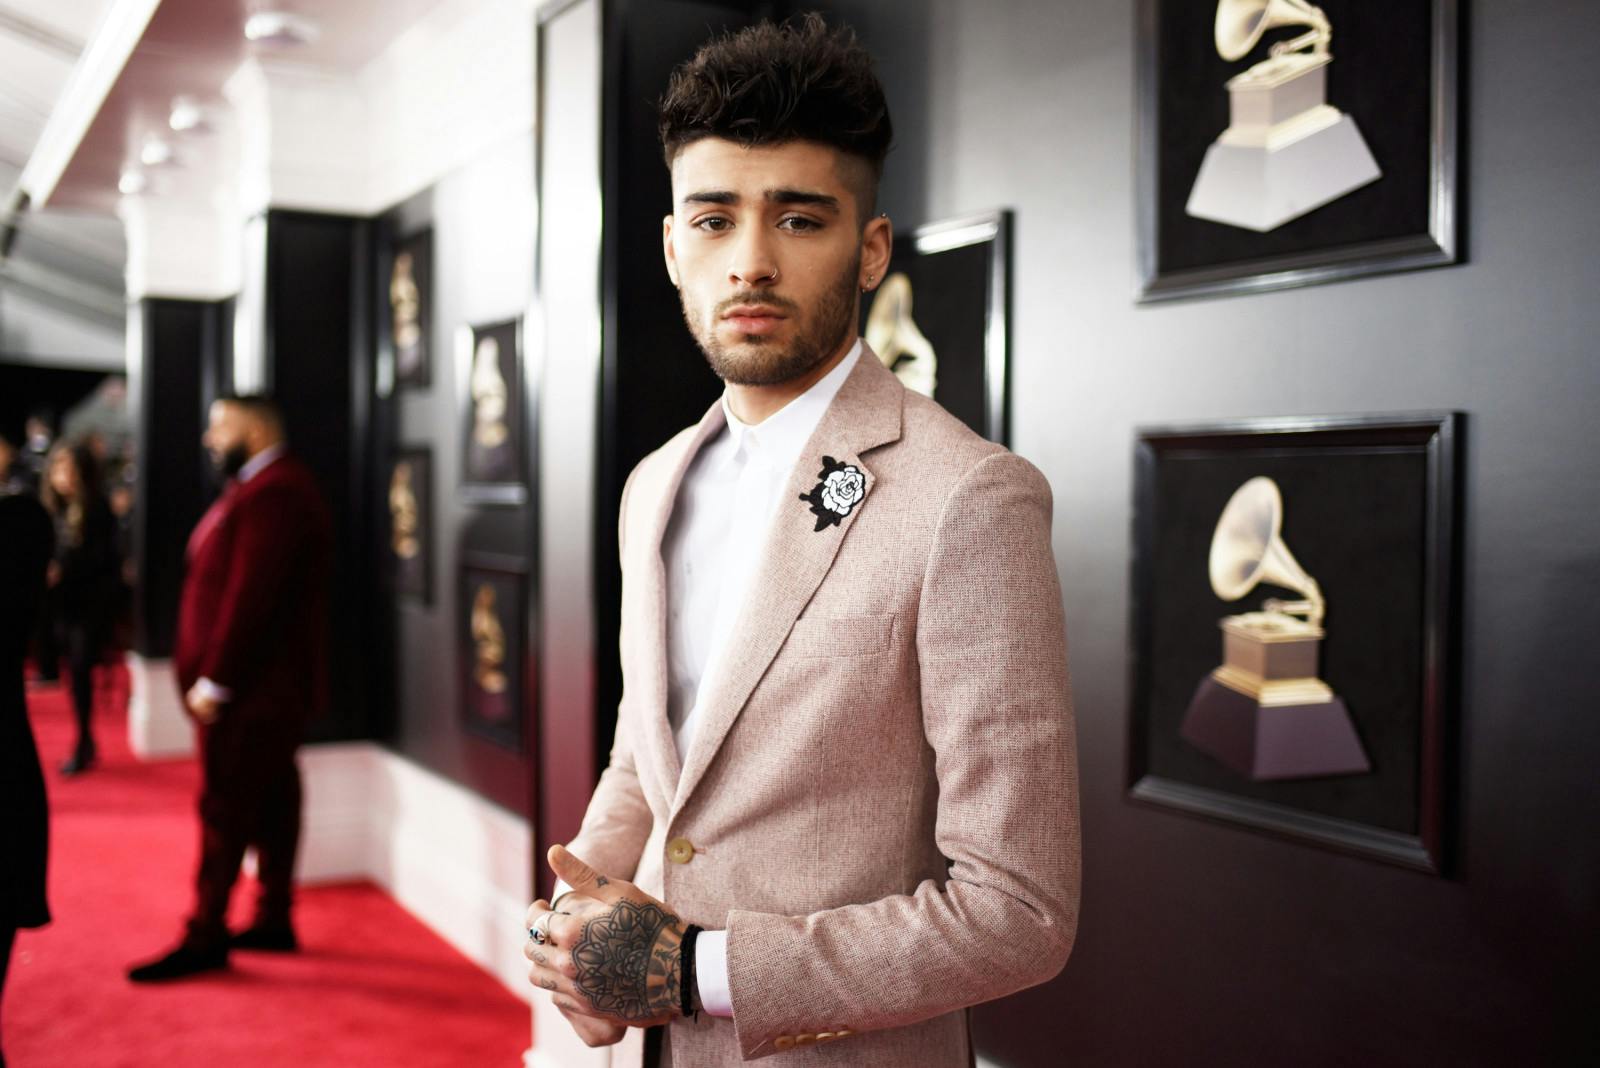 Zayn Malik at the 60th Annual GRAMMY Awards in 2018 (Kevin Mazur/Getty Images for NARAS)